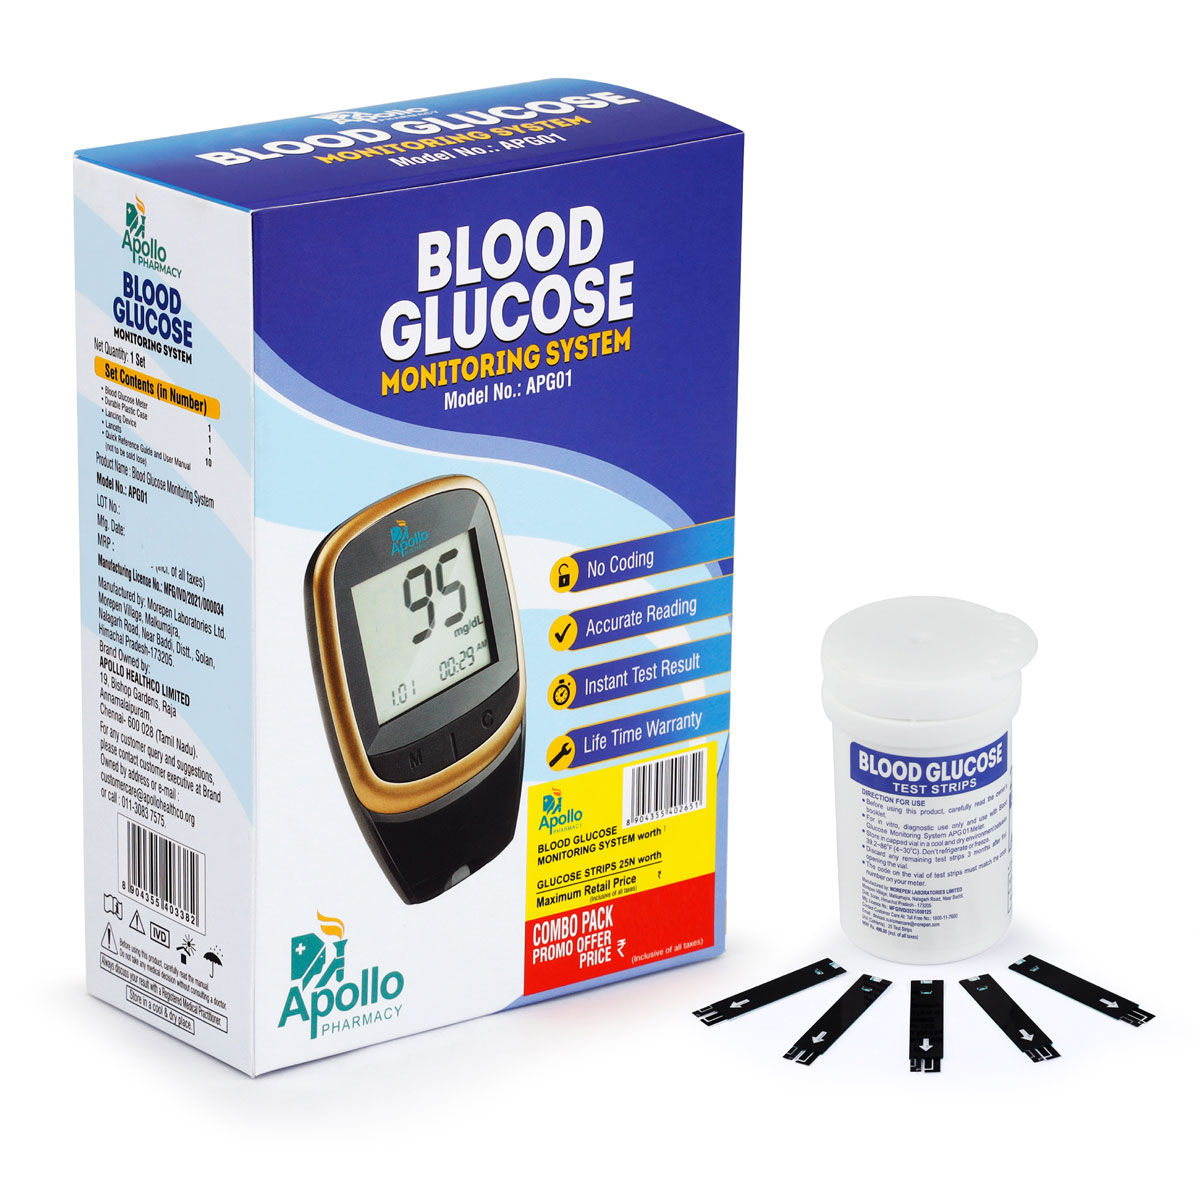 Buy Apollo Pharmacy Blood Glucose Monitoring System APG01 with 25 Test Strips, 1 kit Online